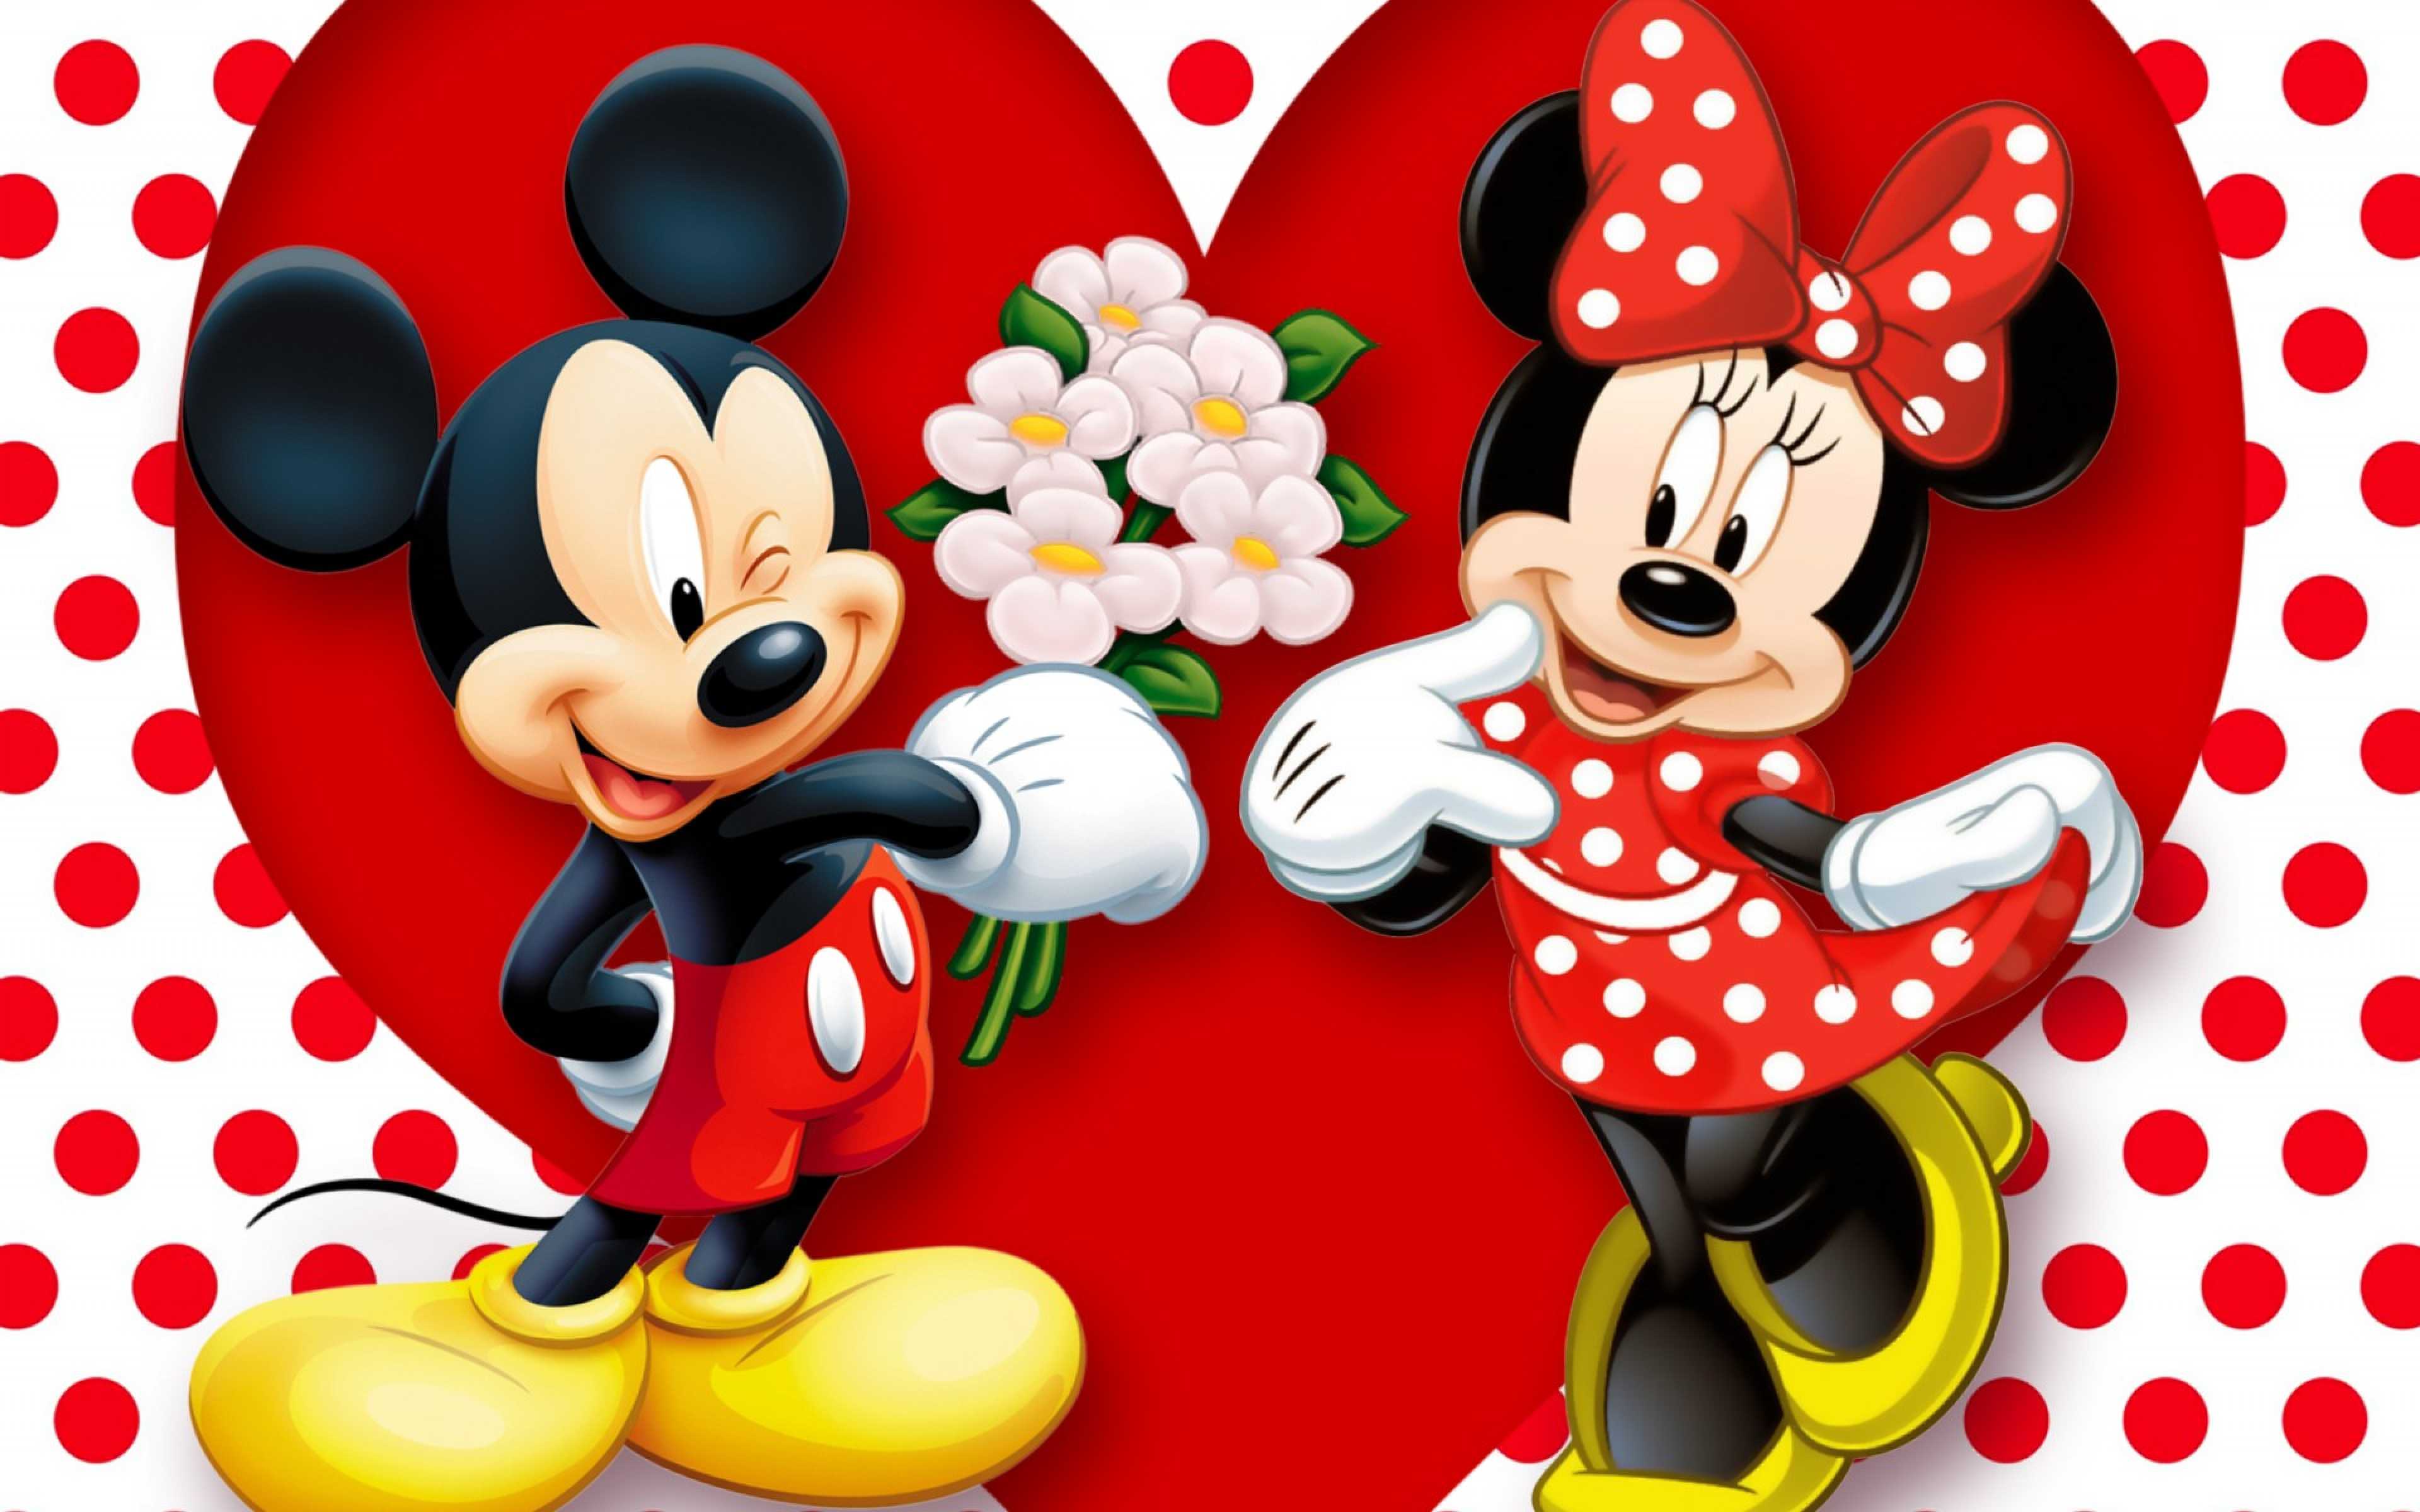 Mickey Mouse Wallpapers iPhone - Wallpaper Cave | Mickey mouse wallpaper, Mickey  mouse wallpaper iphone, Mickey mouse art